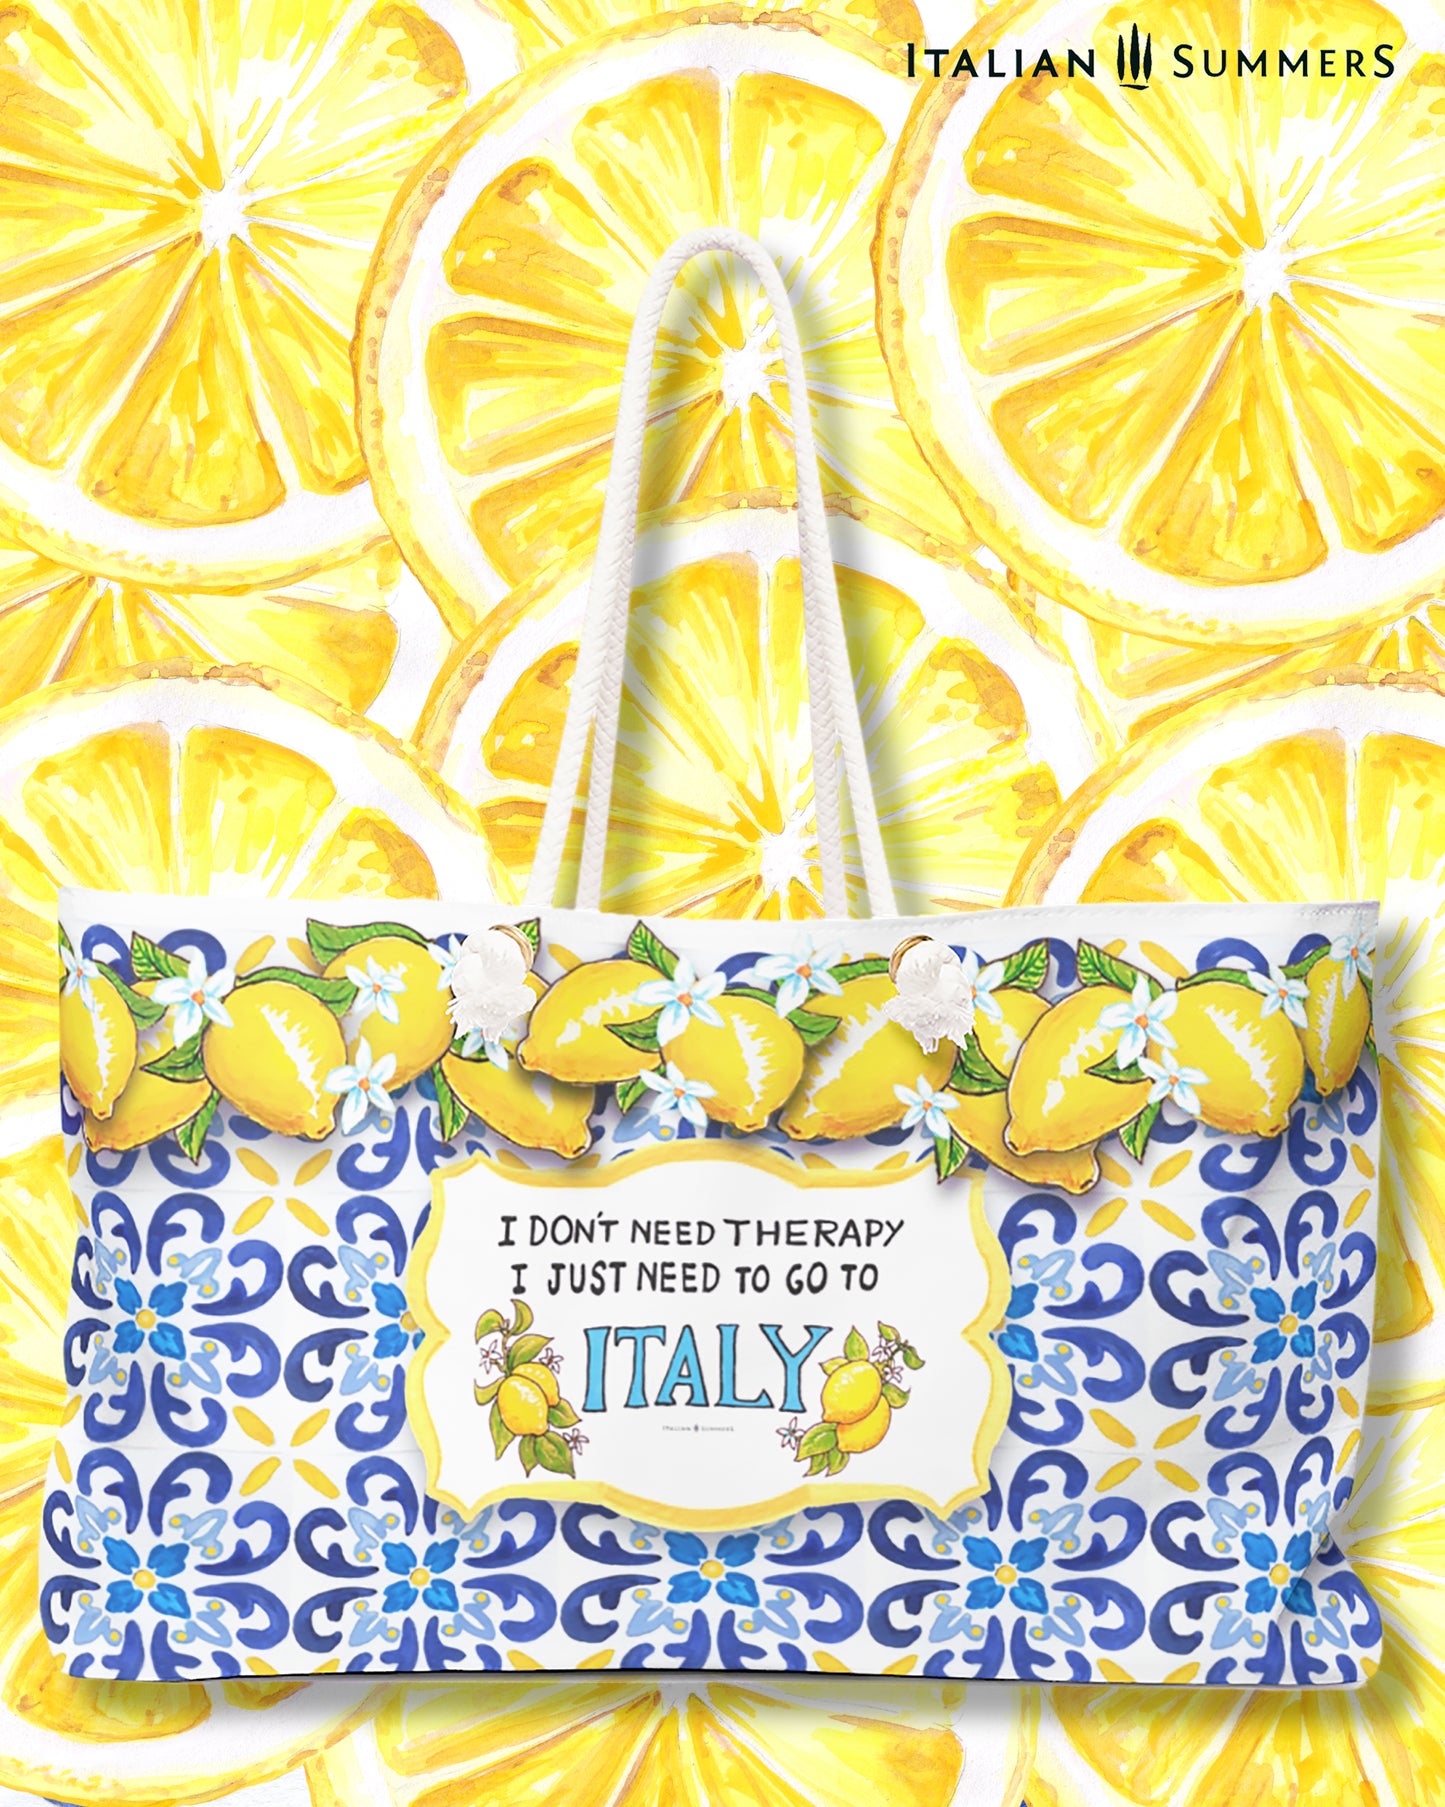 Beach bag I don't need therapy, I just need to go to Italy by Italian Summers